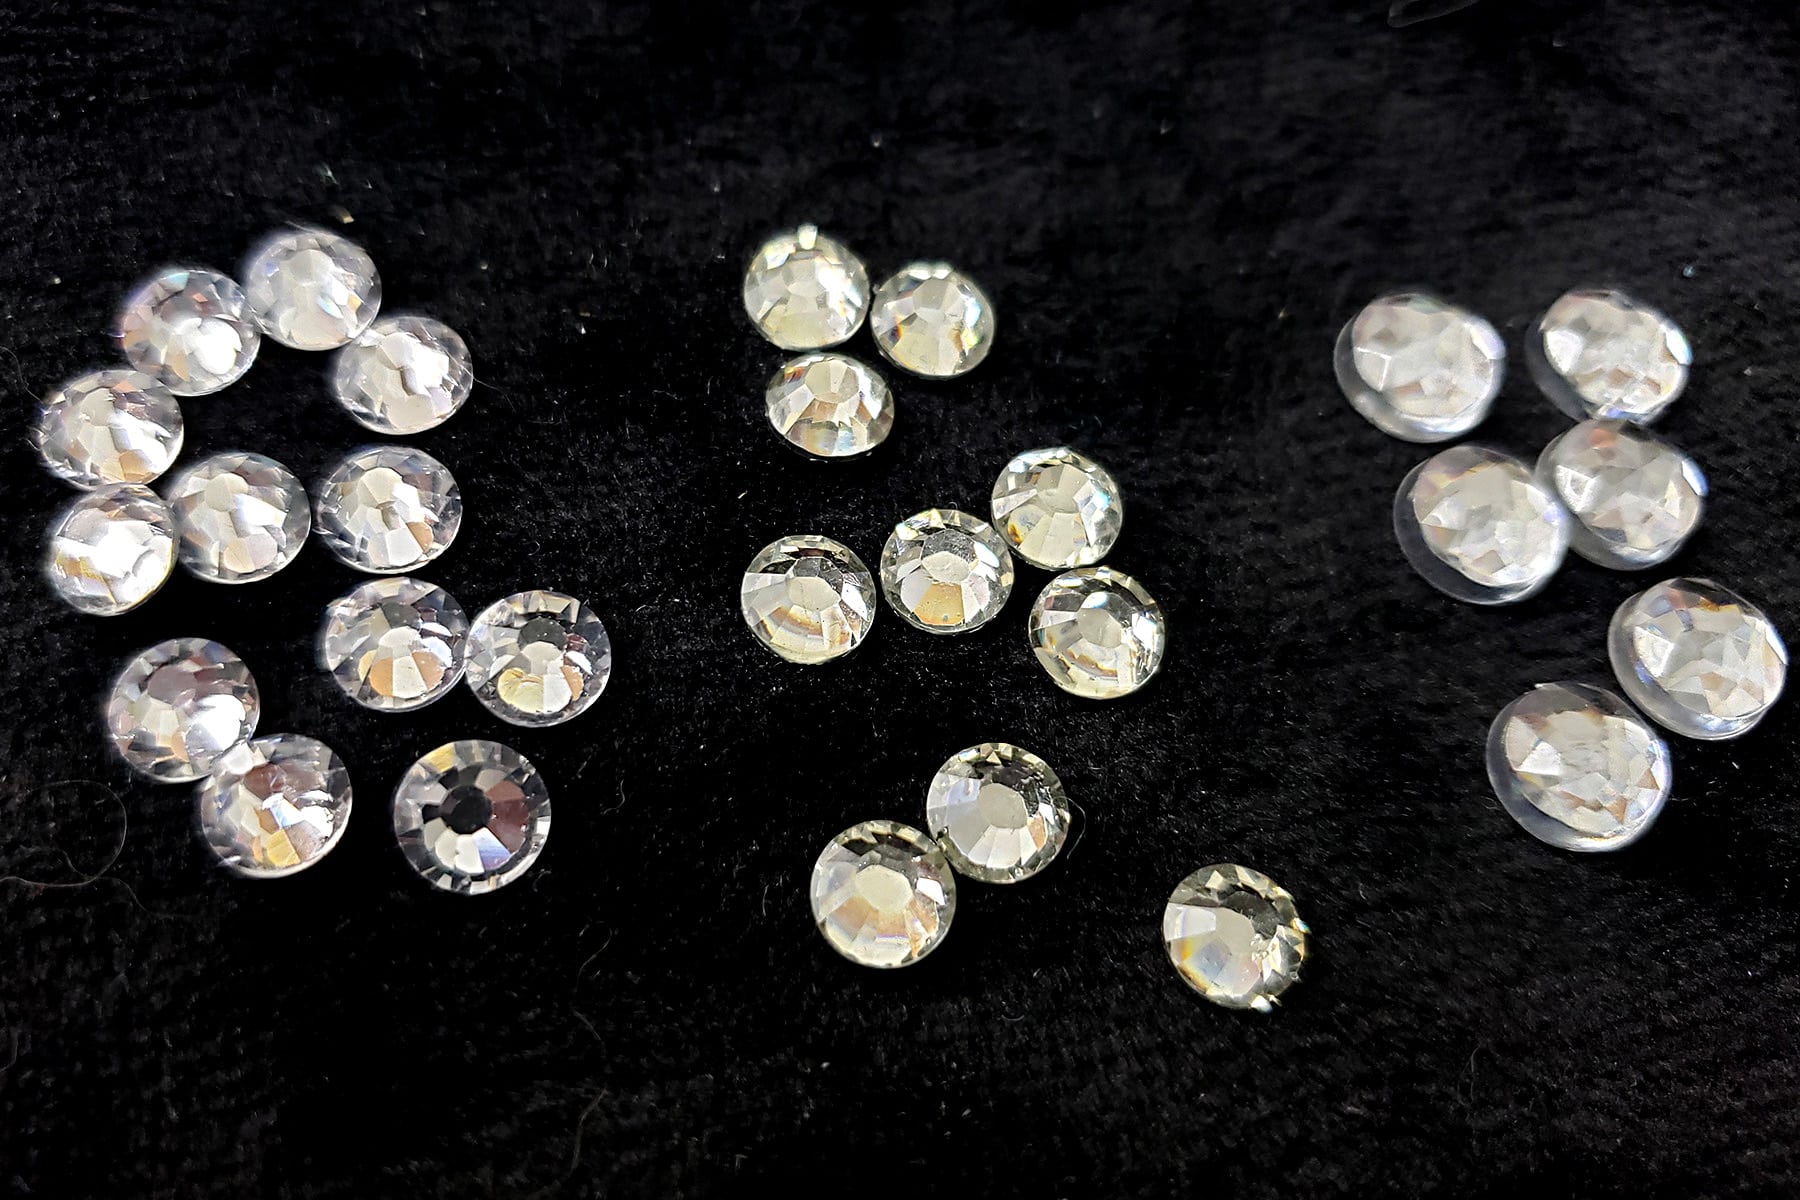 A side by side comparison of 3 small piles of clear rhinestones.